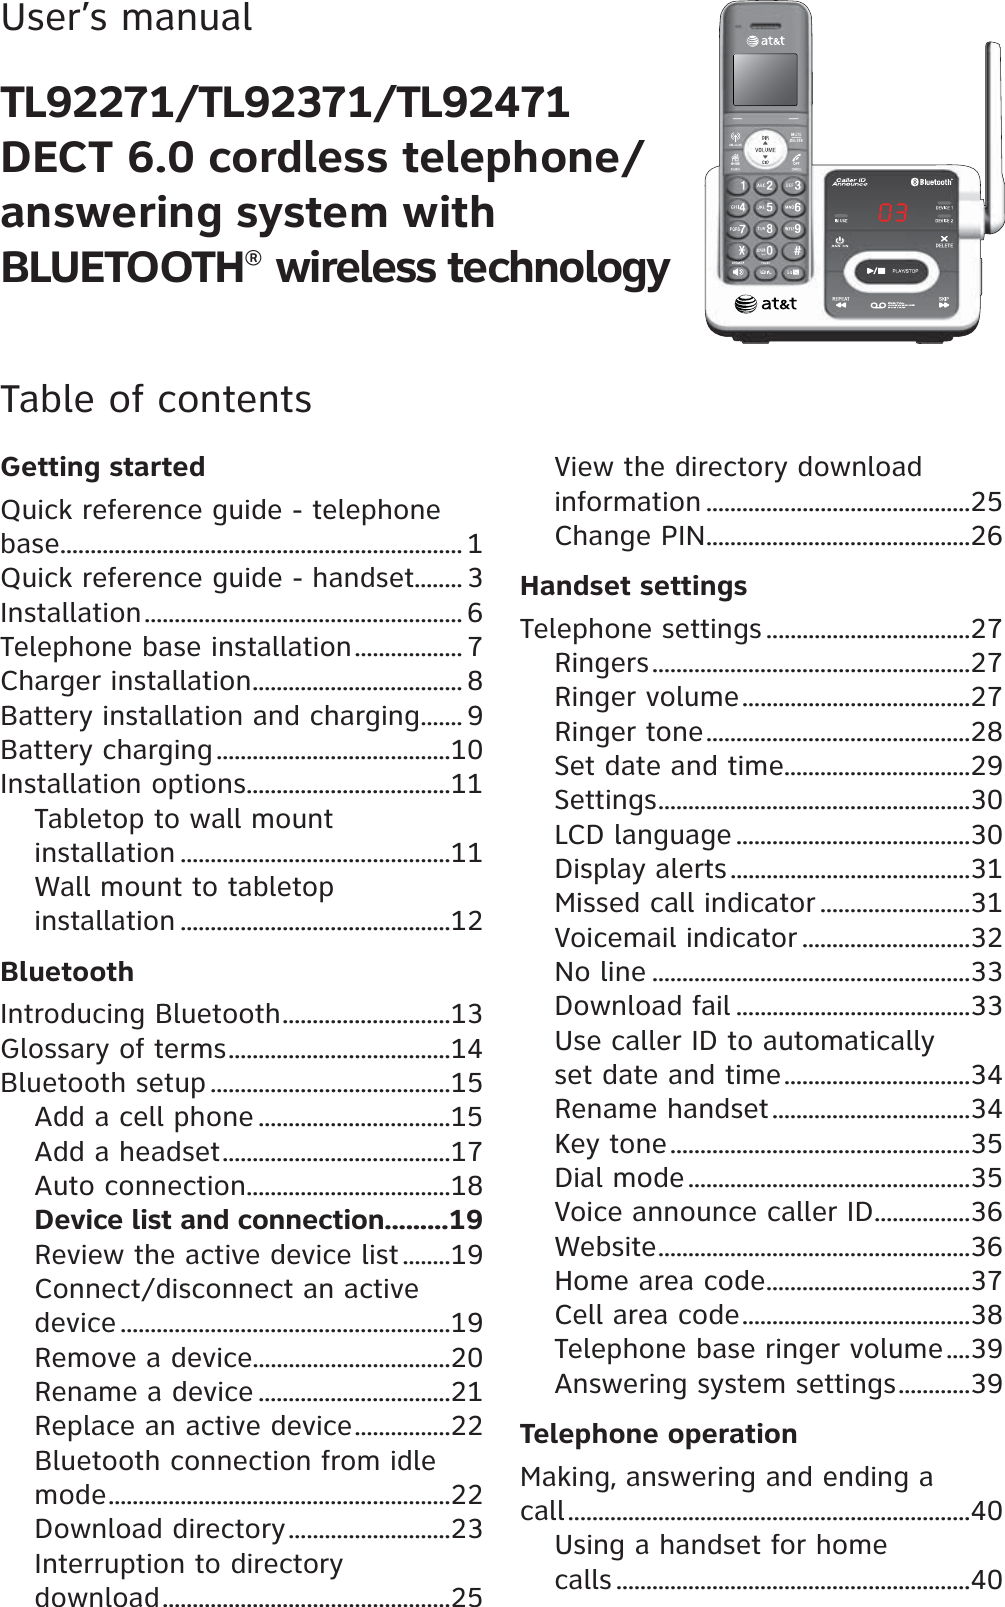 User’s manualTL92271/TL92371/TL92471DECT 6.0 cordless telephone/answering system with BLUETOOTH® wireless technologyTable of contentsGetting startedQuick reference guide - telephone base................................................................... 1Quick reference guide - handset........ 3Installation..................................................... 6Telephone base installation.................. 7Charger installation................................... 8Battery installation and charging....... 9Battery charging.......................................10Installation options..................................11Tabletop to wall mount installation .............................................11Wall mount to tabletop installation .............................................12BluetoothIntroducing Bluetooth............................13Glossary of terms.....................................14Bluetooth setup ........................................15Add a cell phone ................................15Add a headset......................................17Auto connection..................................18Device list and connection.........19Review the active device list ........19Connect/disconnect an active device .......................................................19Remove a device.................................20Rename a device ................................21Replace an active device................22Bluetooth connection from idle mode.........................................................22Download directory...........................23Interruption to directory download................................................25View the directory download information ............................................25Change PIN............................................26Handset settingsTelephone settings ..................................27Ringers.....................................................27Ringer volume......................................27Ringer tone............................................28Set date and time...............................29Settings....................................................30LCD language .......................................30Display alerts........................................31Missed call indicator .........................31Voicemail indicator ............................32No line .....................................................33Download fail .......................................33Use caller ID to automatically set date and time...............................34Rename handset.................................34Key tone..................................................35Dial mode...............................................35Voice announce caller ID................36Website....................................................36Home area code..................................37Cell area code......................................38Telephone base ringer volume....39Answering system settings............39Telephone operationMaking, answering and ending a call...................................................................40Using a handset for home calls ...........................................................40